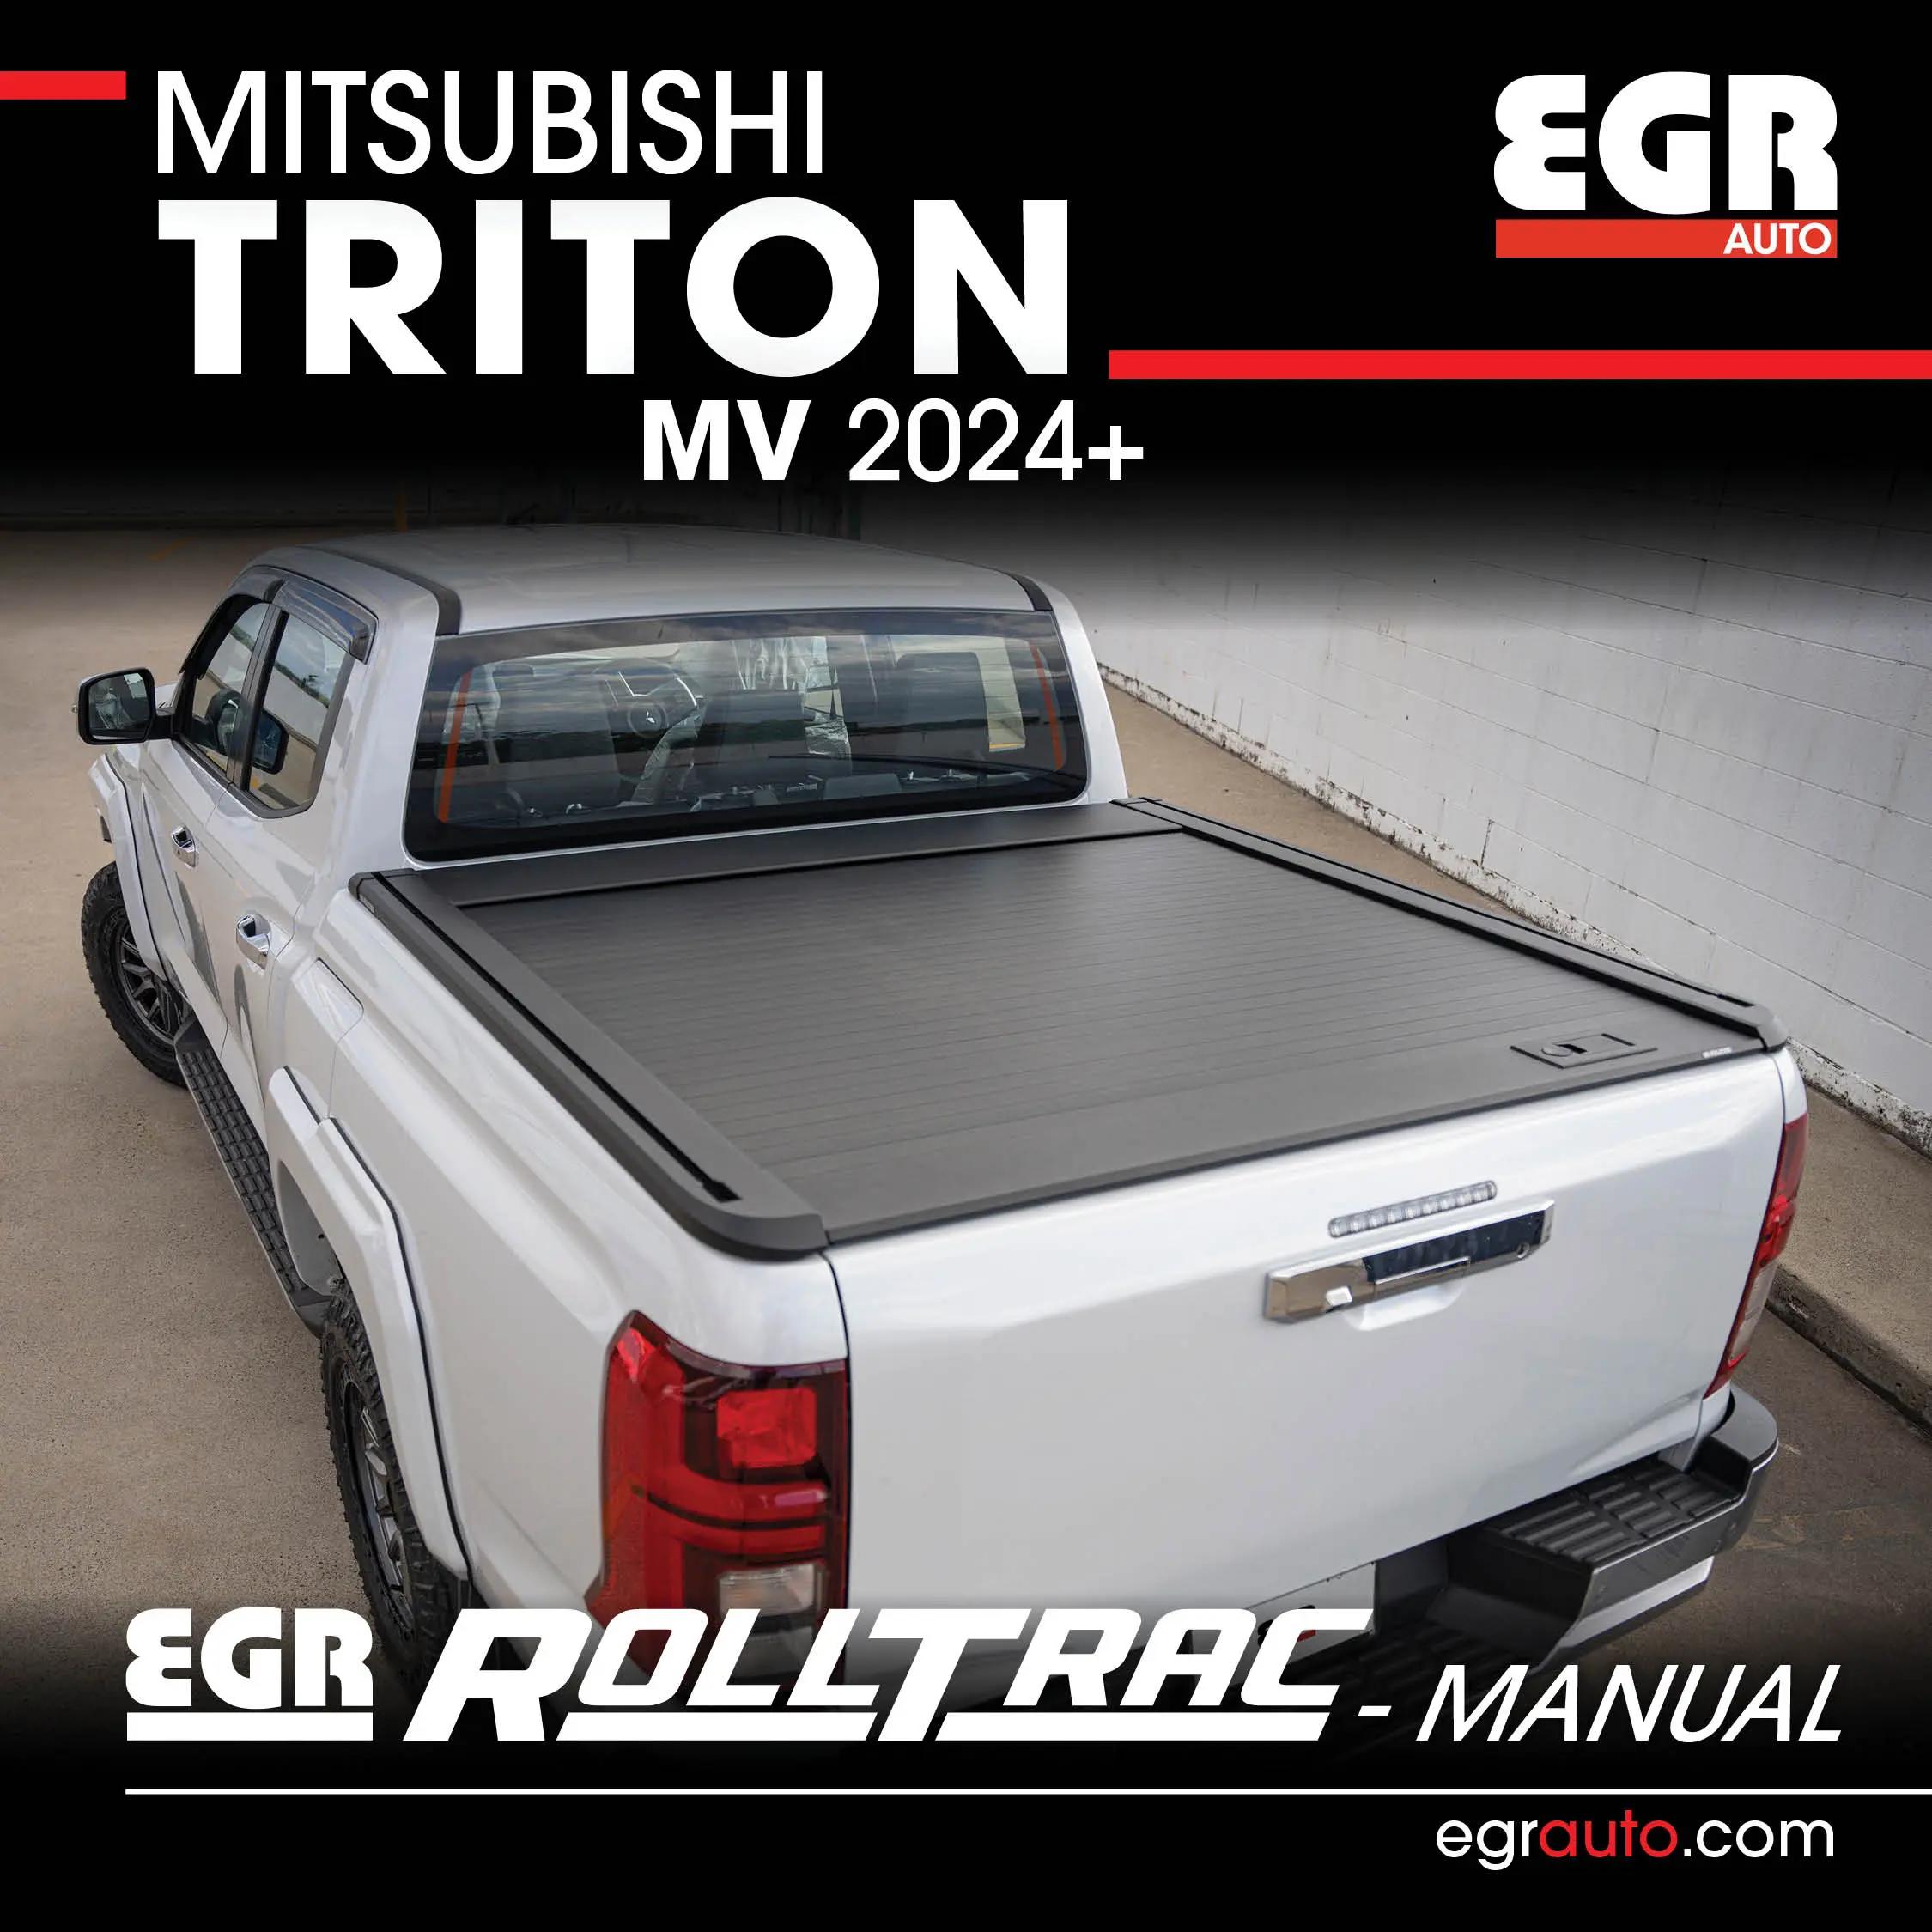 Promo banner - Click here for new EGR Rolltrac Manual available now for the Mitsubishi Triton MV 2024.